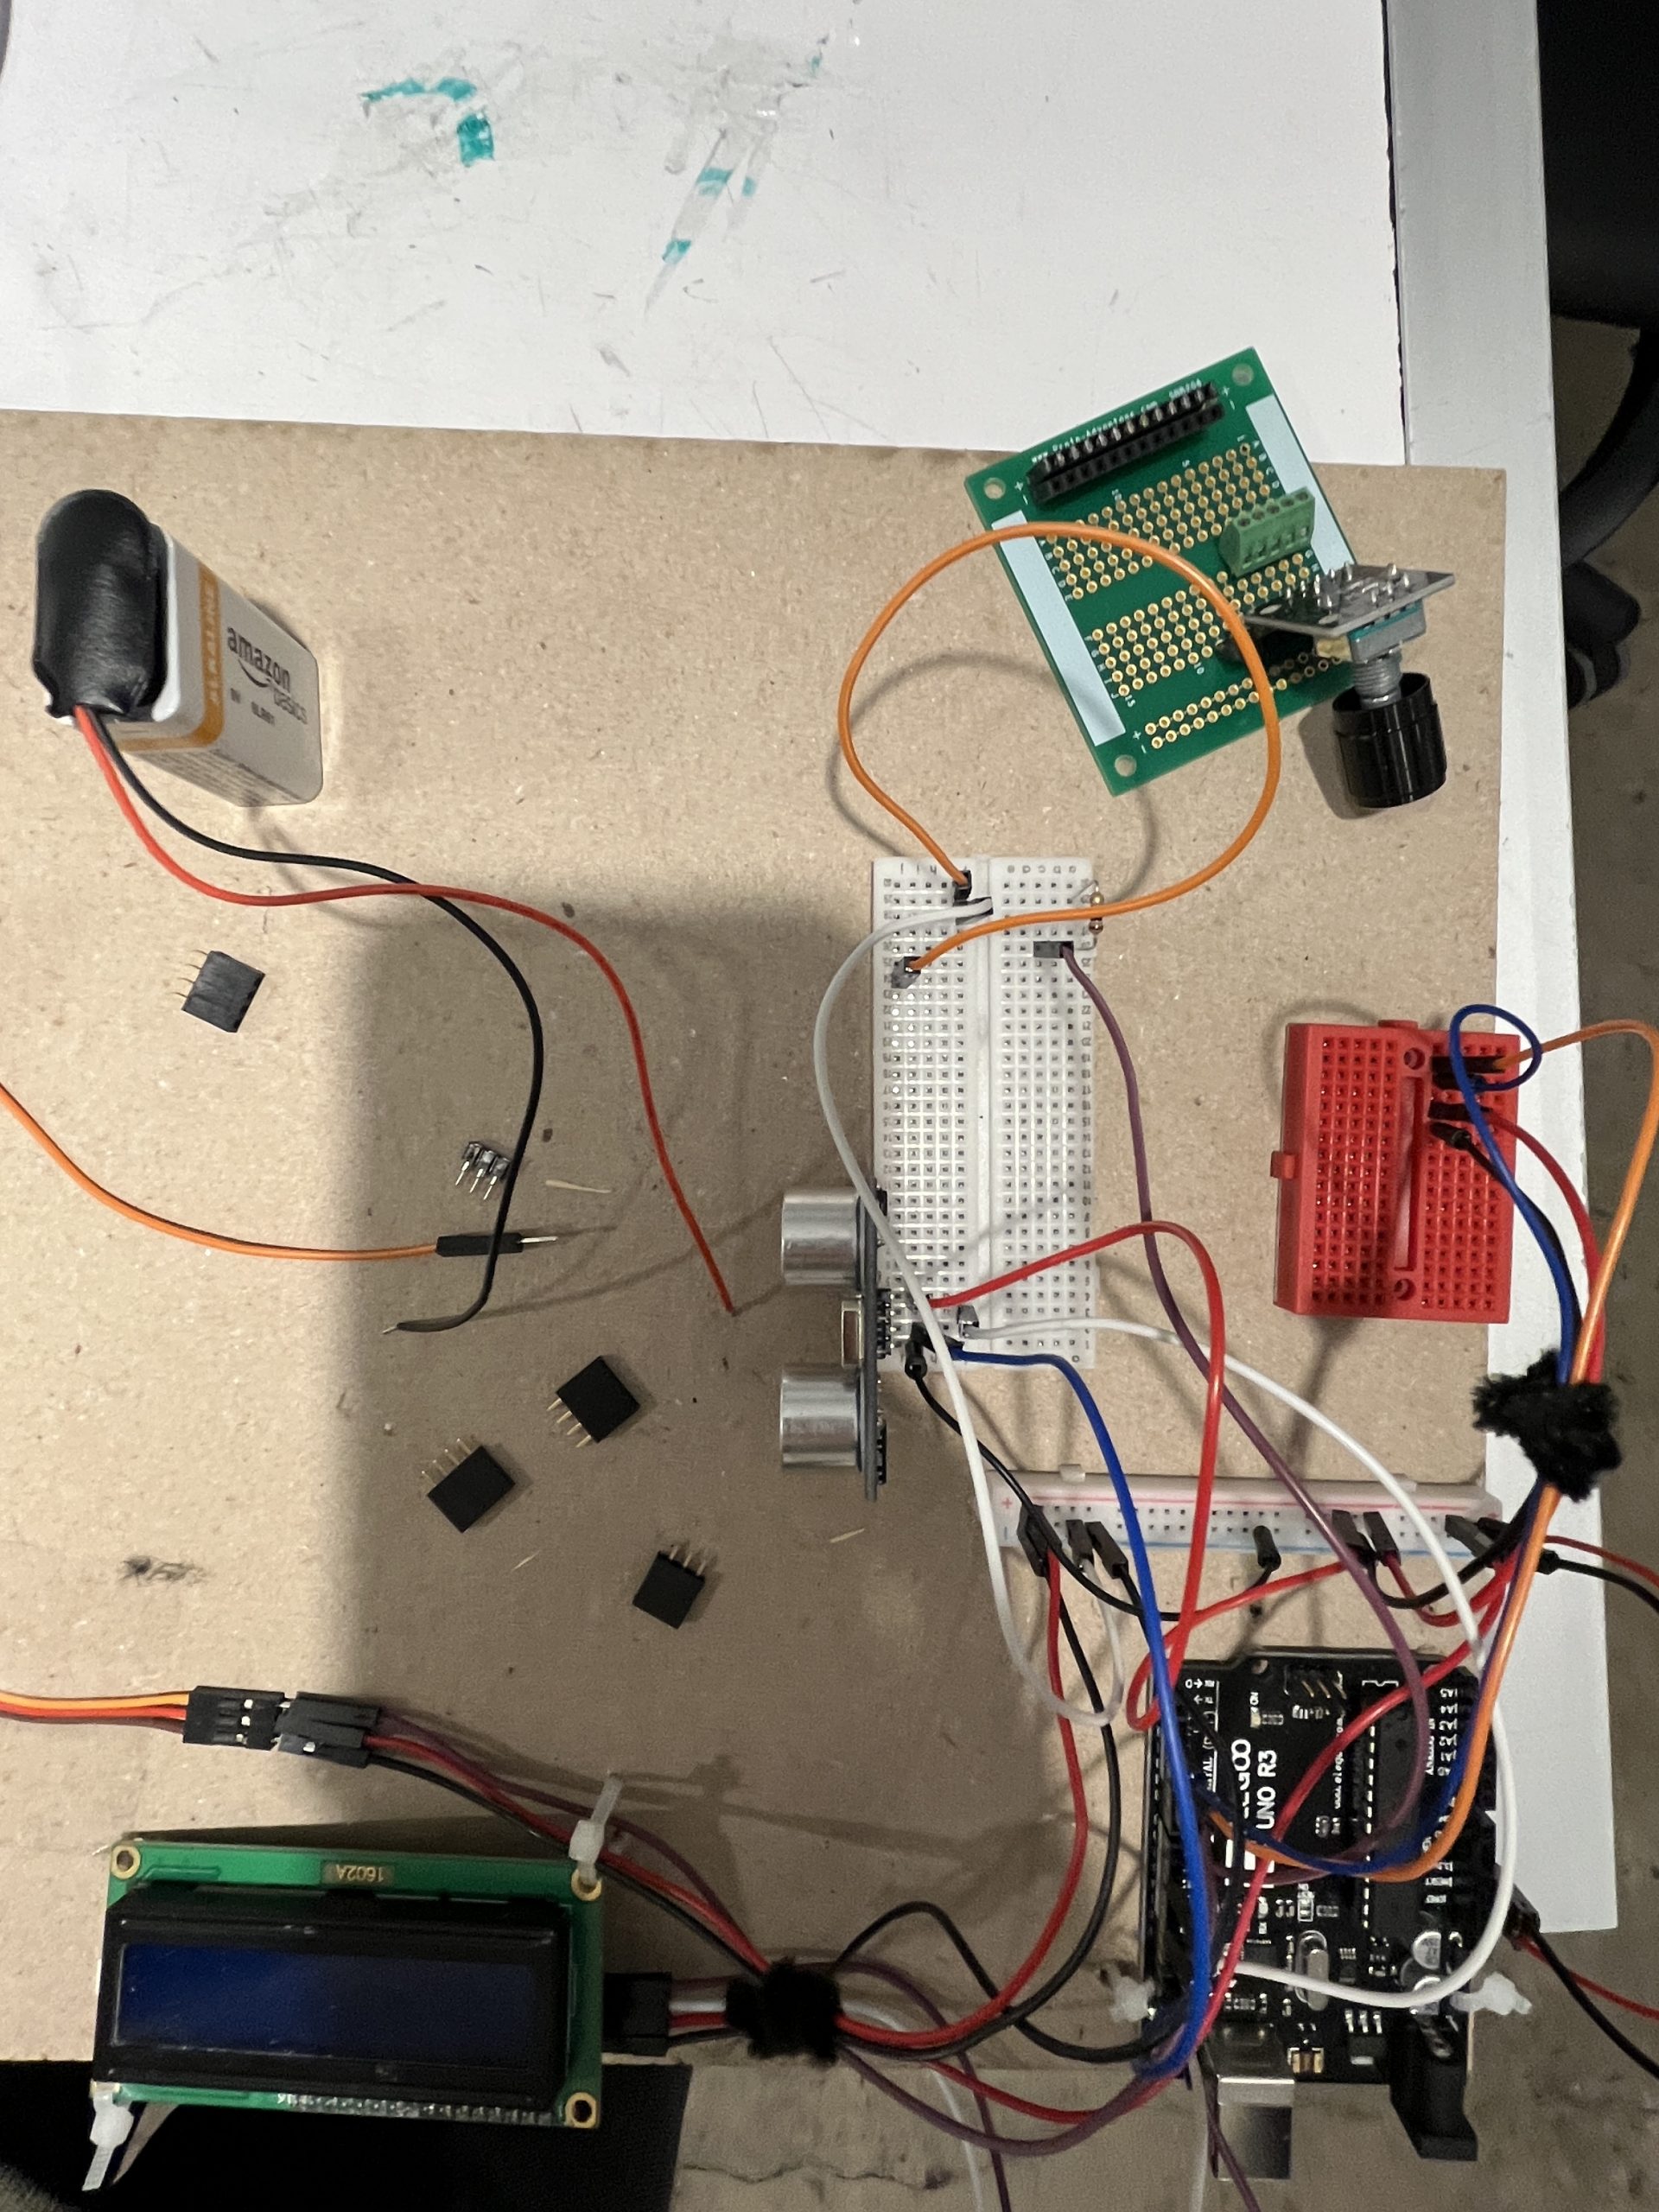 A mess of breadboards, wires, and components on a chipboard. There are a few transistors scattered and a lot of the wires are unplugged.